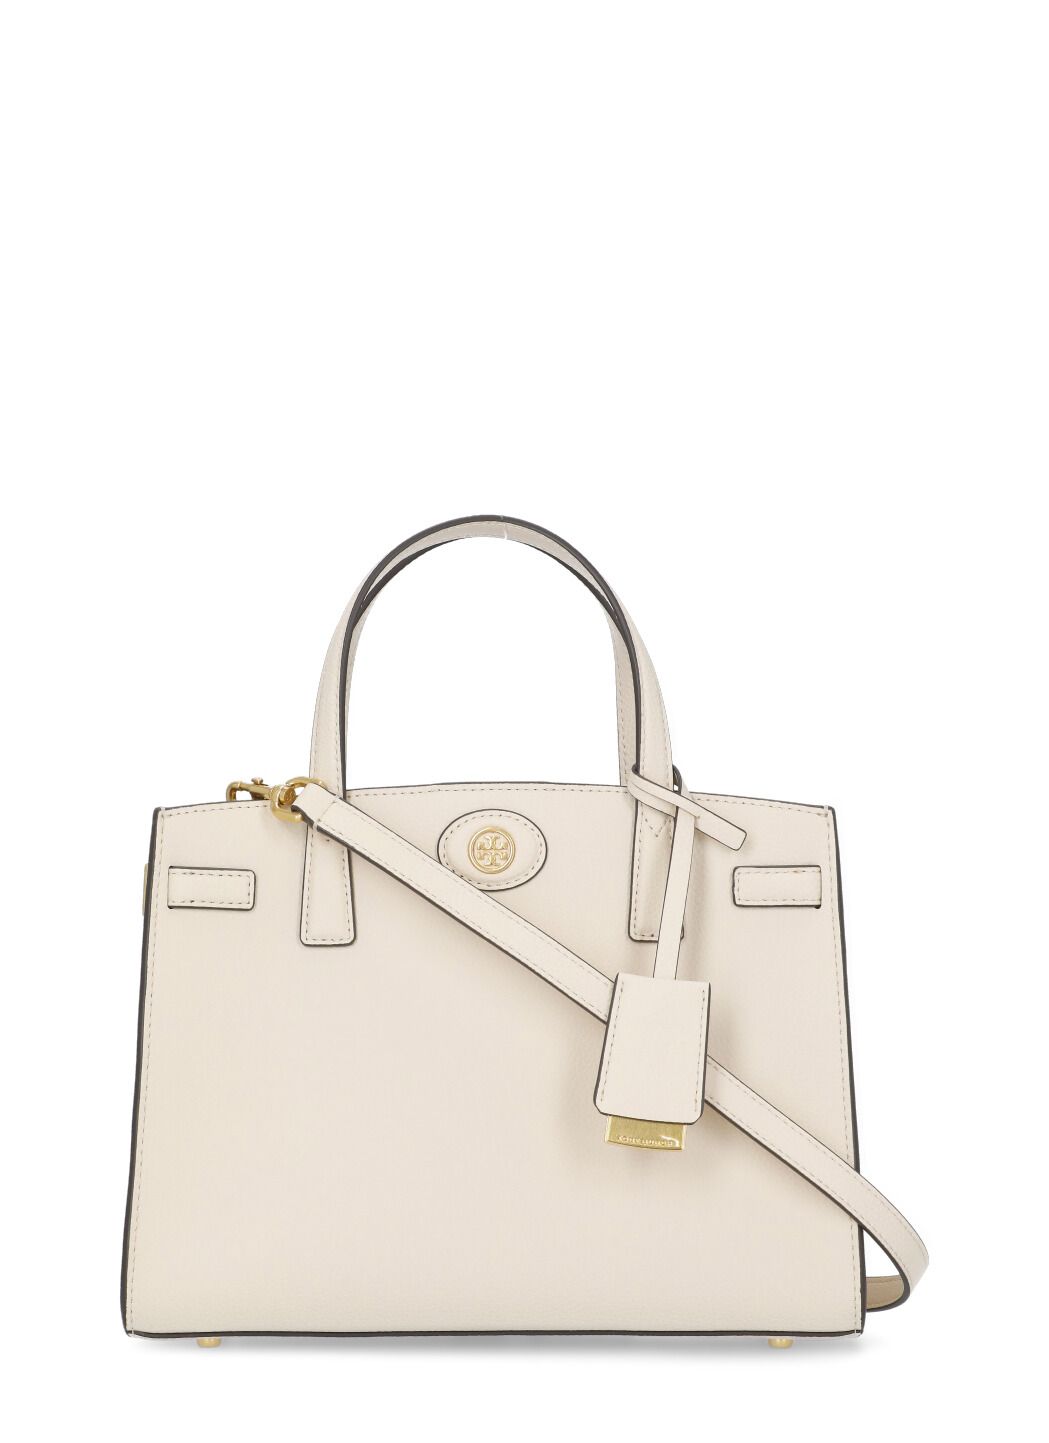 Tory Burch Robinson Pebbled Leather Medium Tote | Bloomingdale's